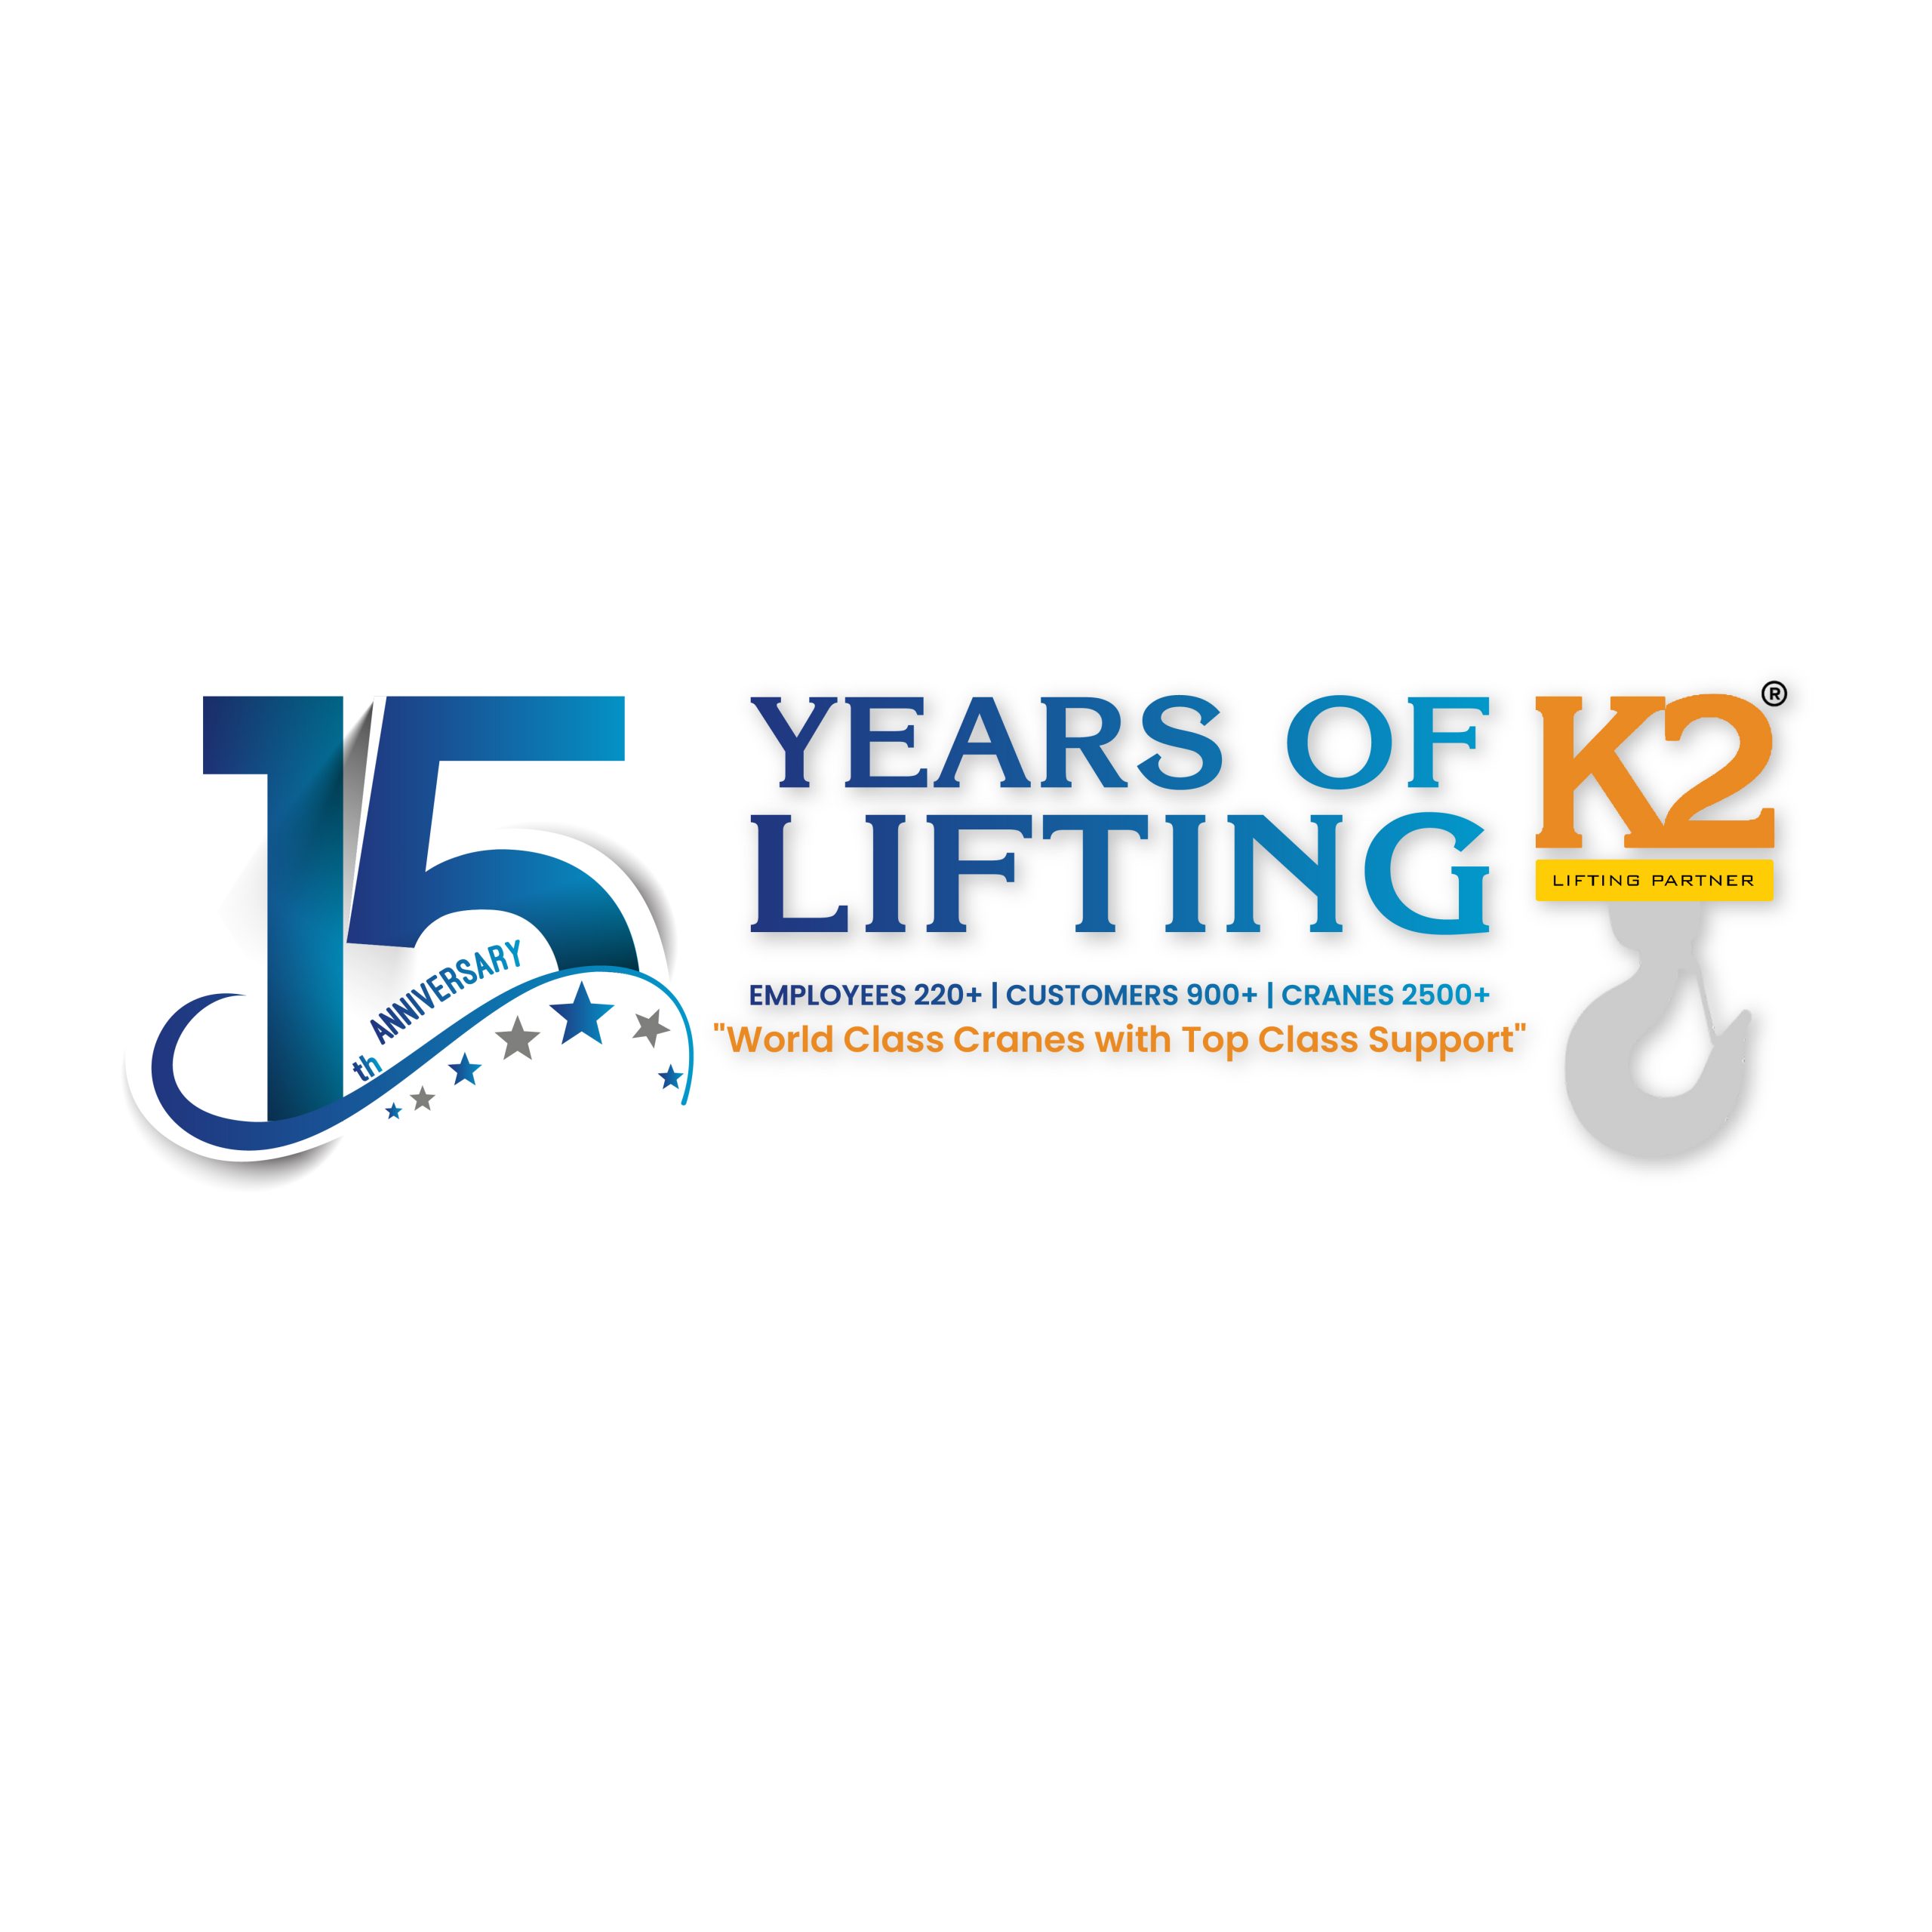 Shaping the Future of Crane Manufacturing_Celebrating K2 Cranes 15th Anniversary